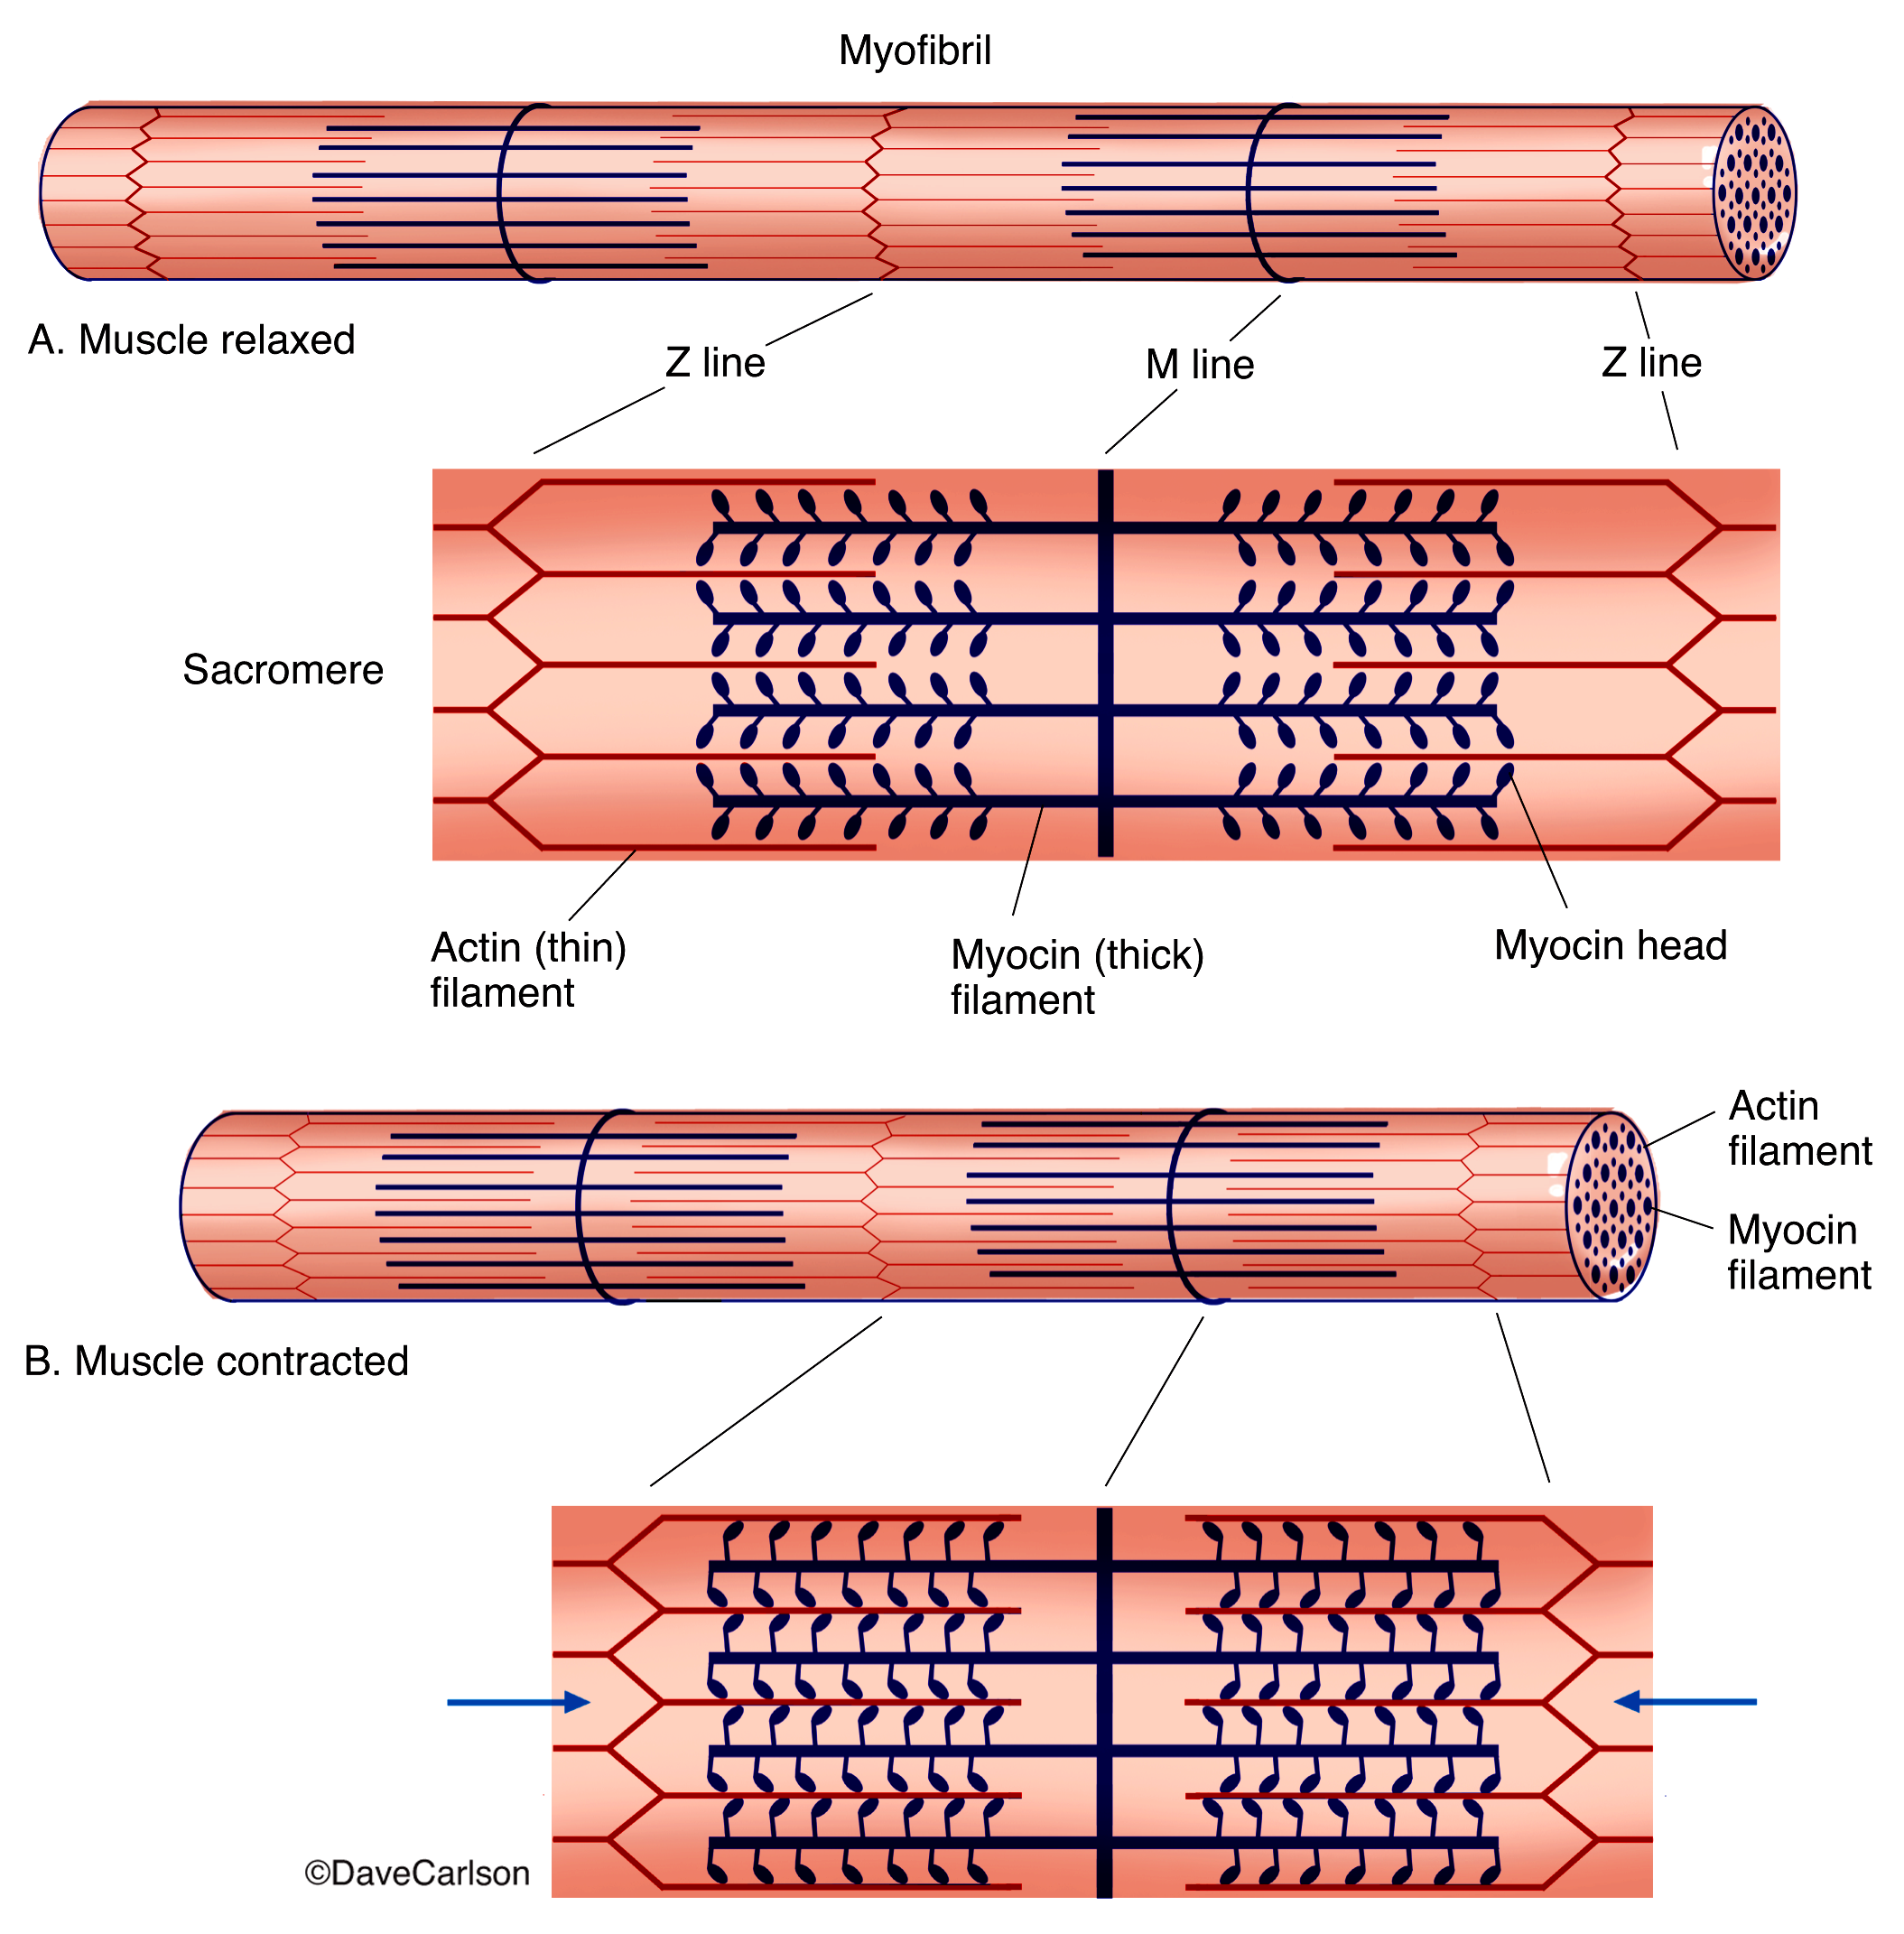 this images shows the physiology of the muscle and muscle contraction.